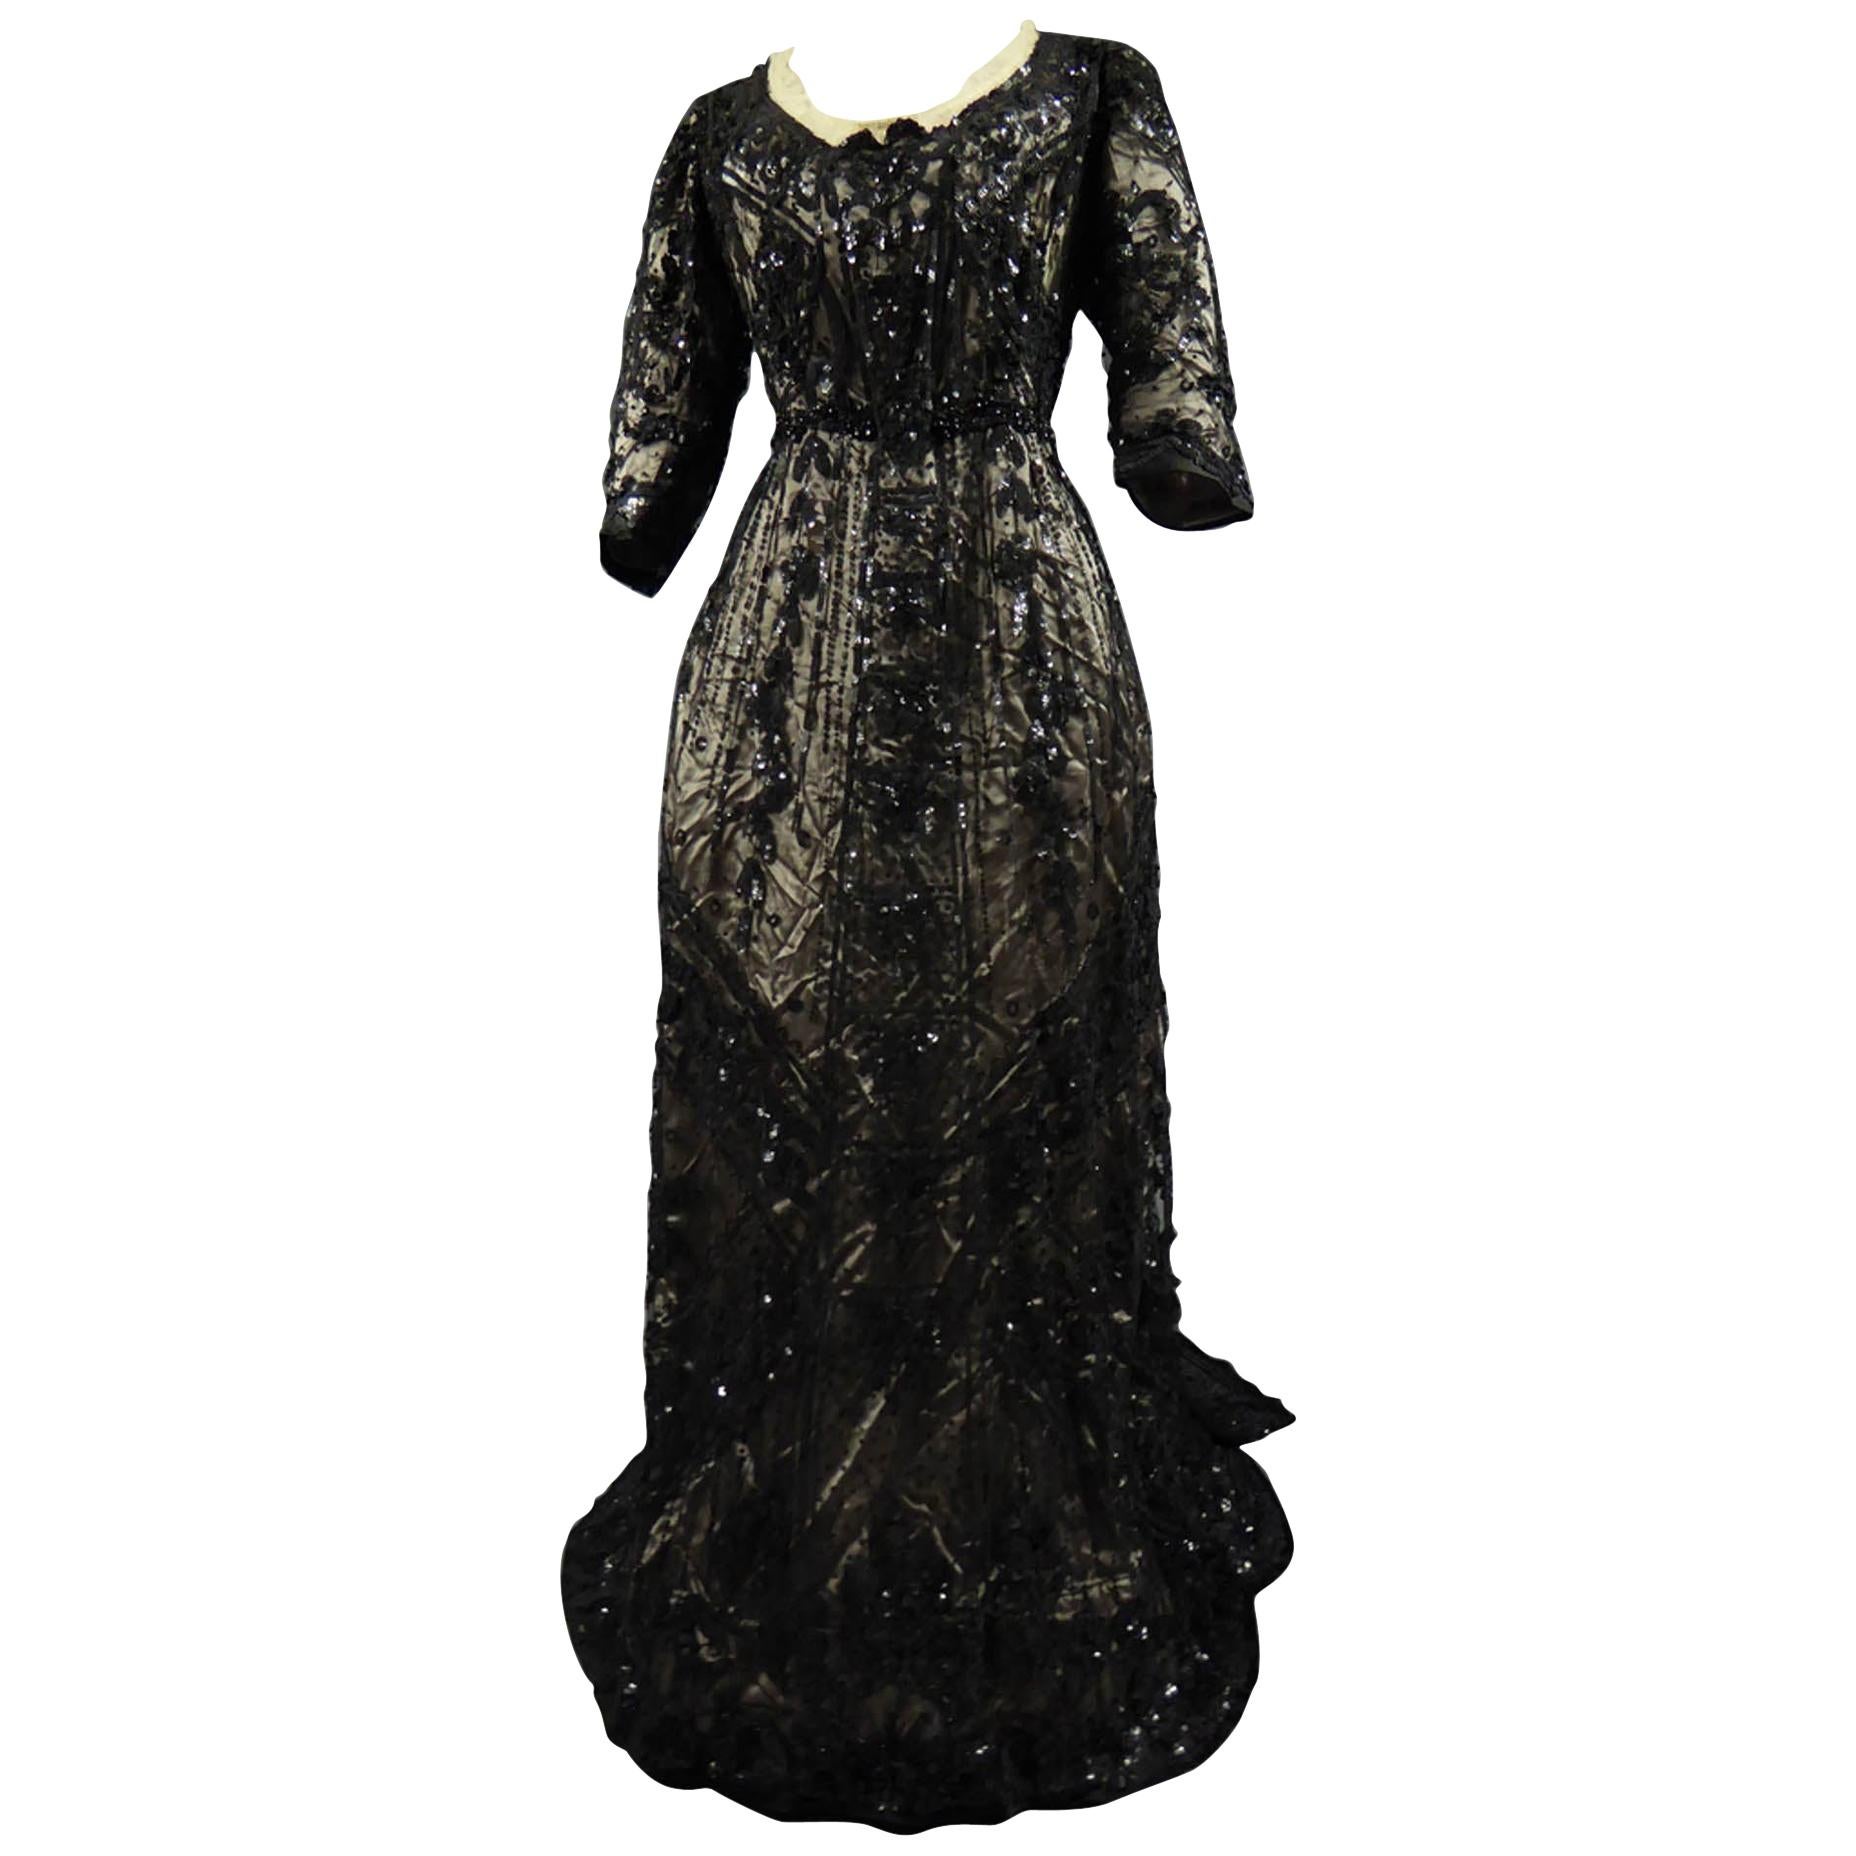 A French Reception Dress in Tulle Embroidered with Jet and Sequins Circa 1900